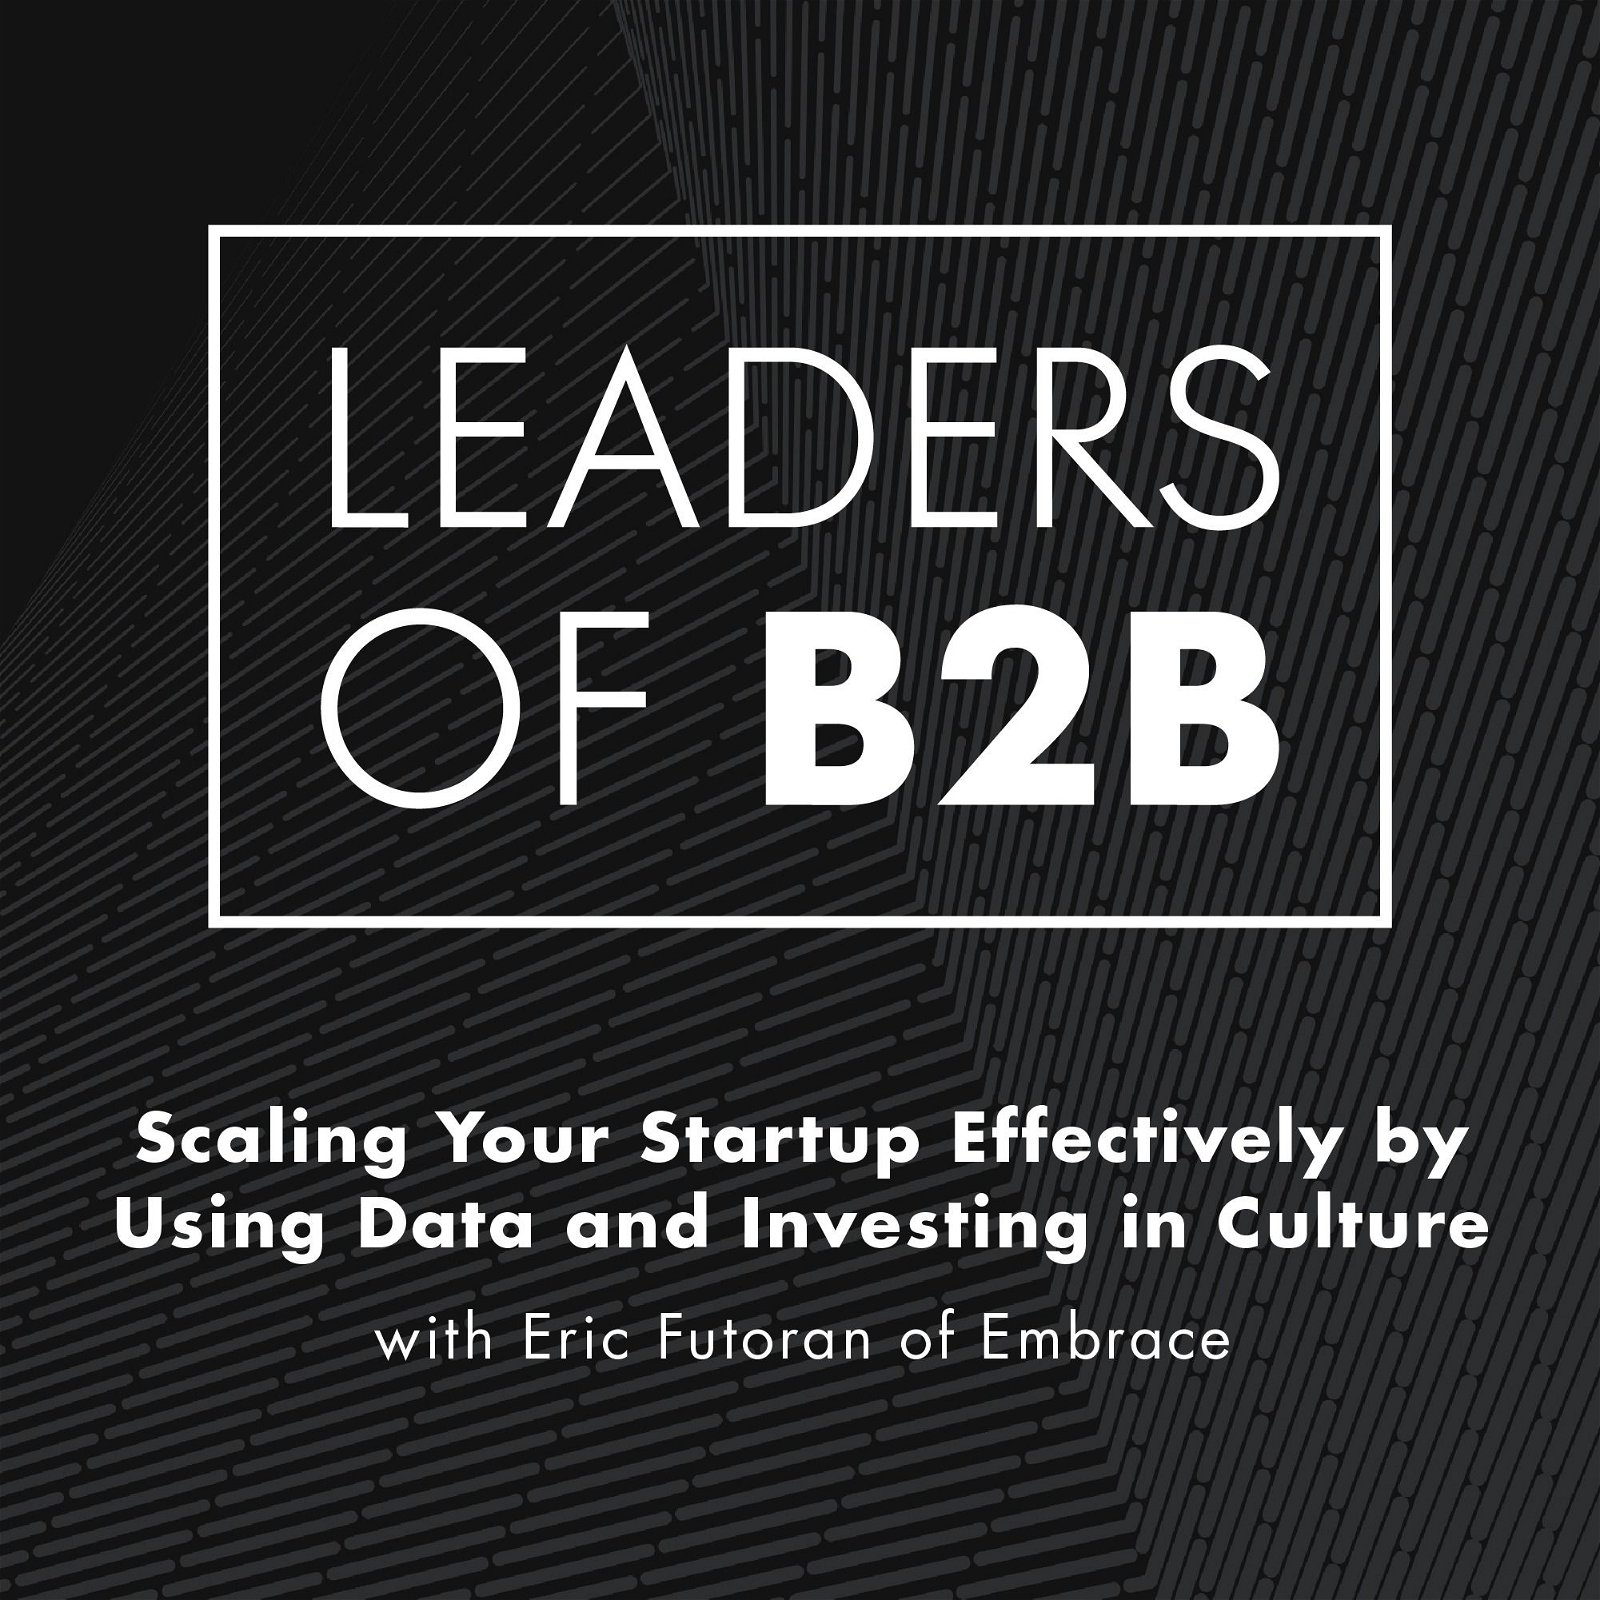 Scaling Your Startup Effectively by Using Data and Investing in Culture with Eric Futoran of Embrace